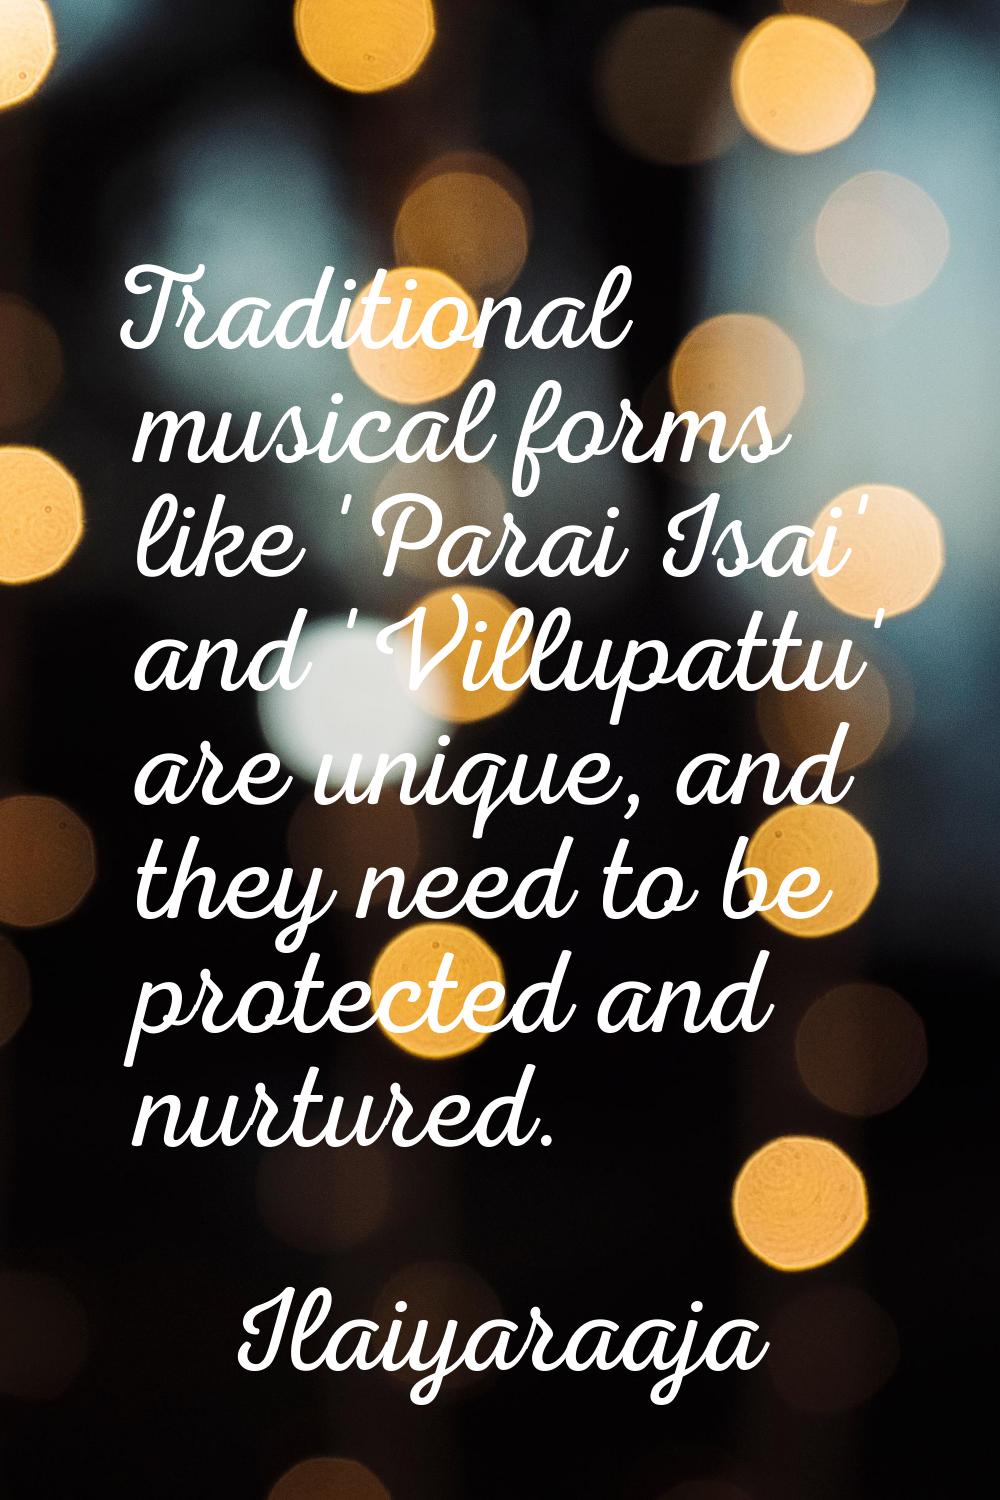 Traditional musical forms like 'Parai Isai' and 'Villupattu' are unique, and they need to be protec